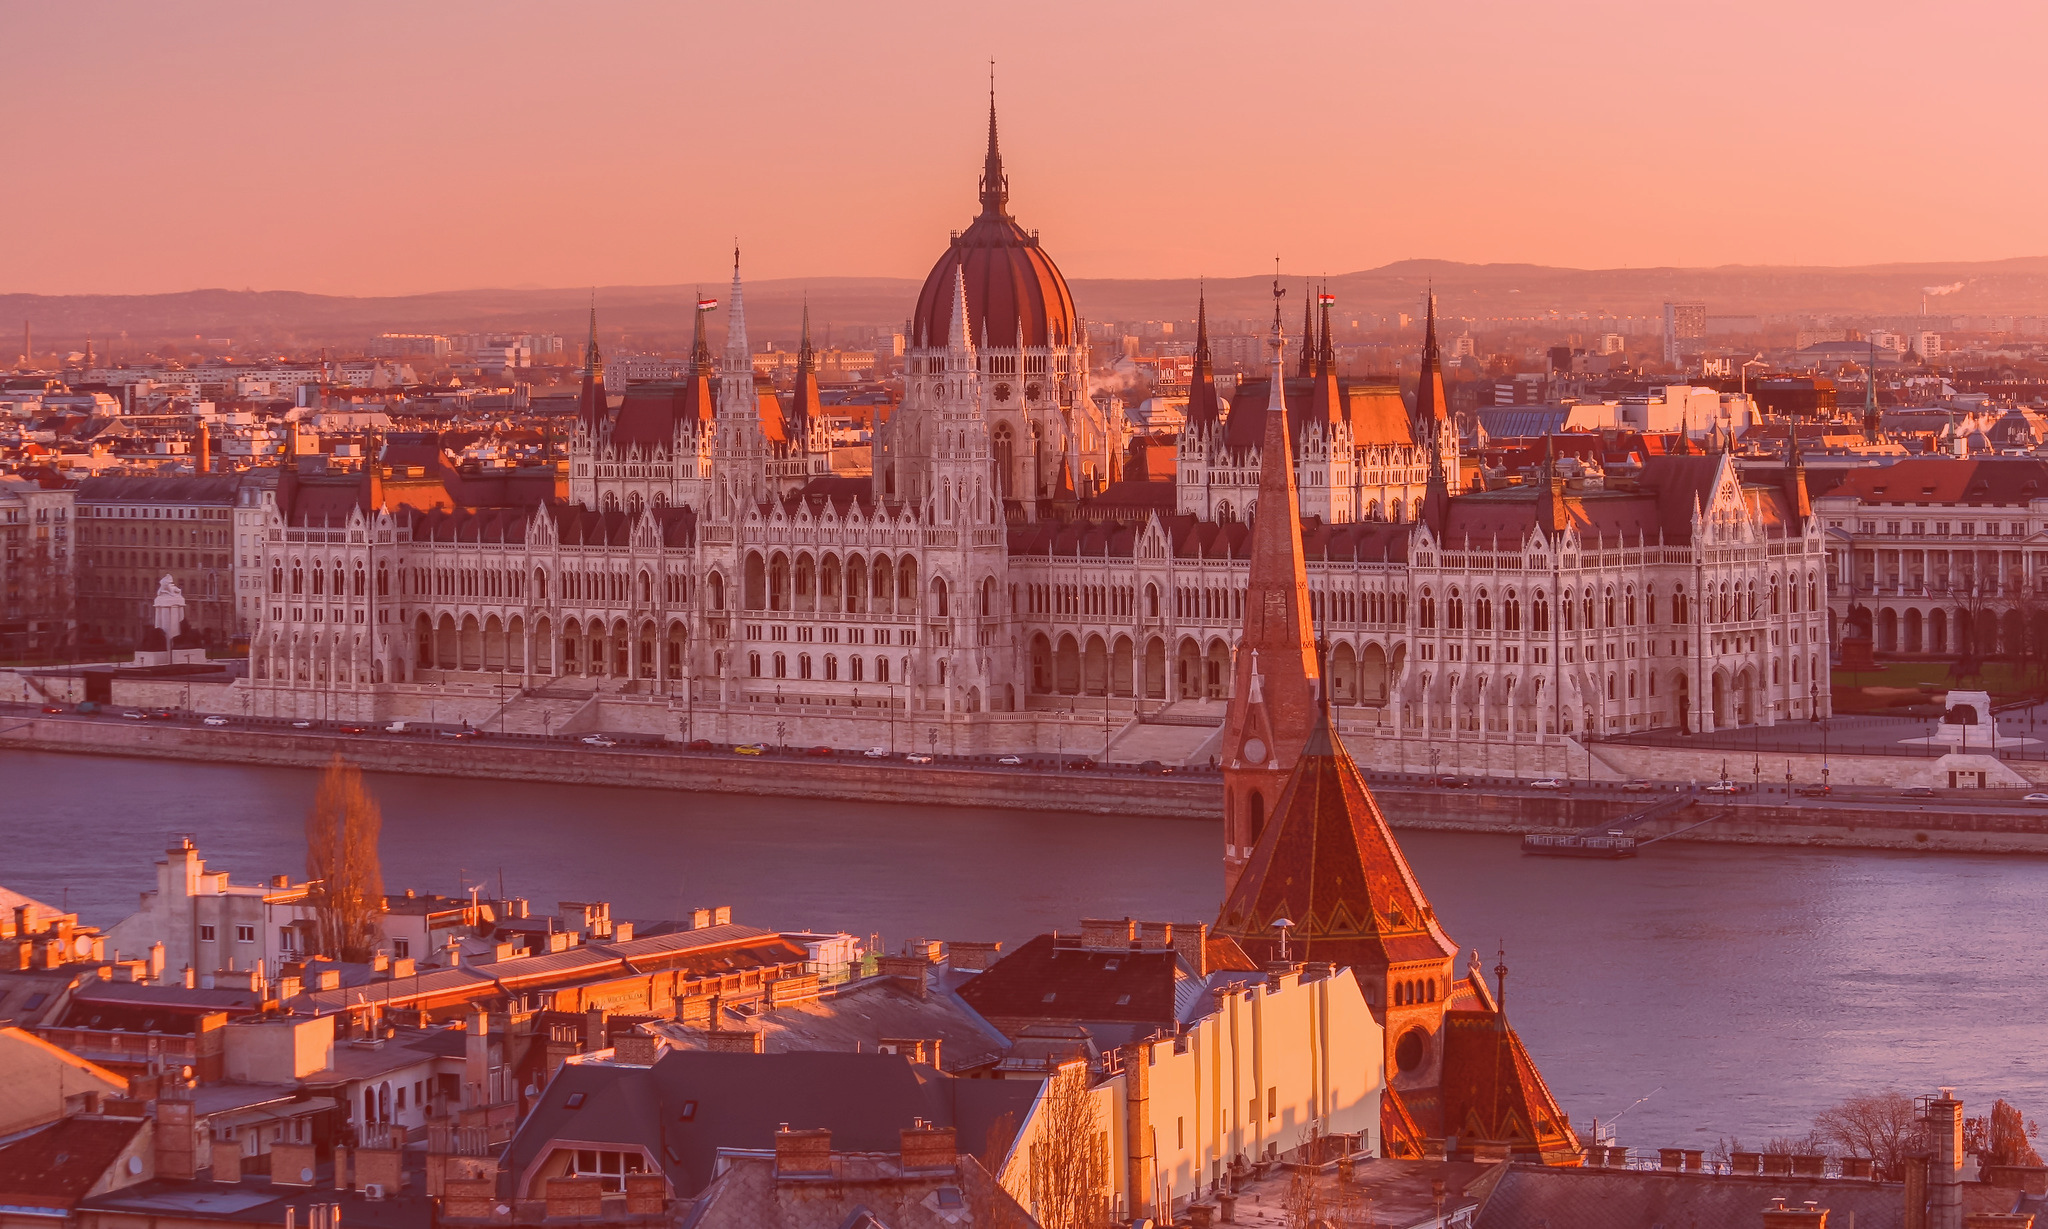 Photo: "Budapest: Hungarian Parliament", by Jorge Franganillo licensed under CC BY 2.0. Hue modified from the original